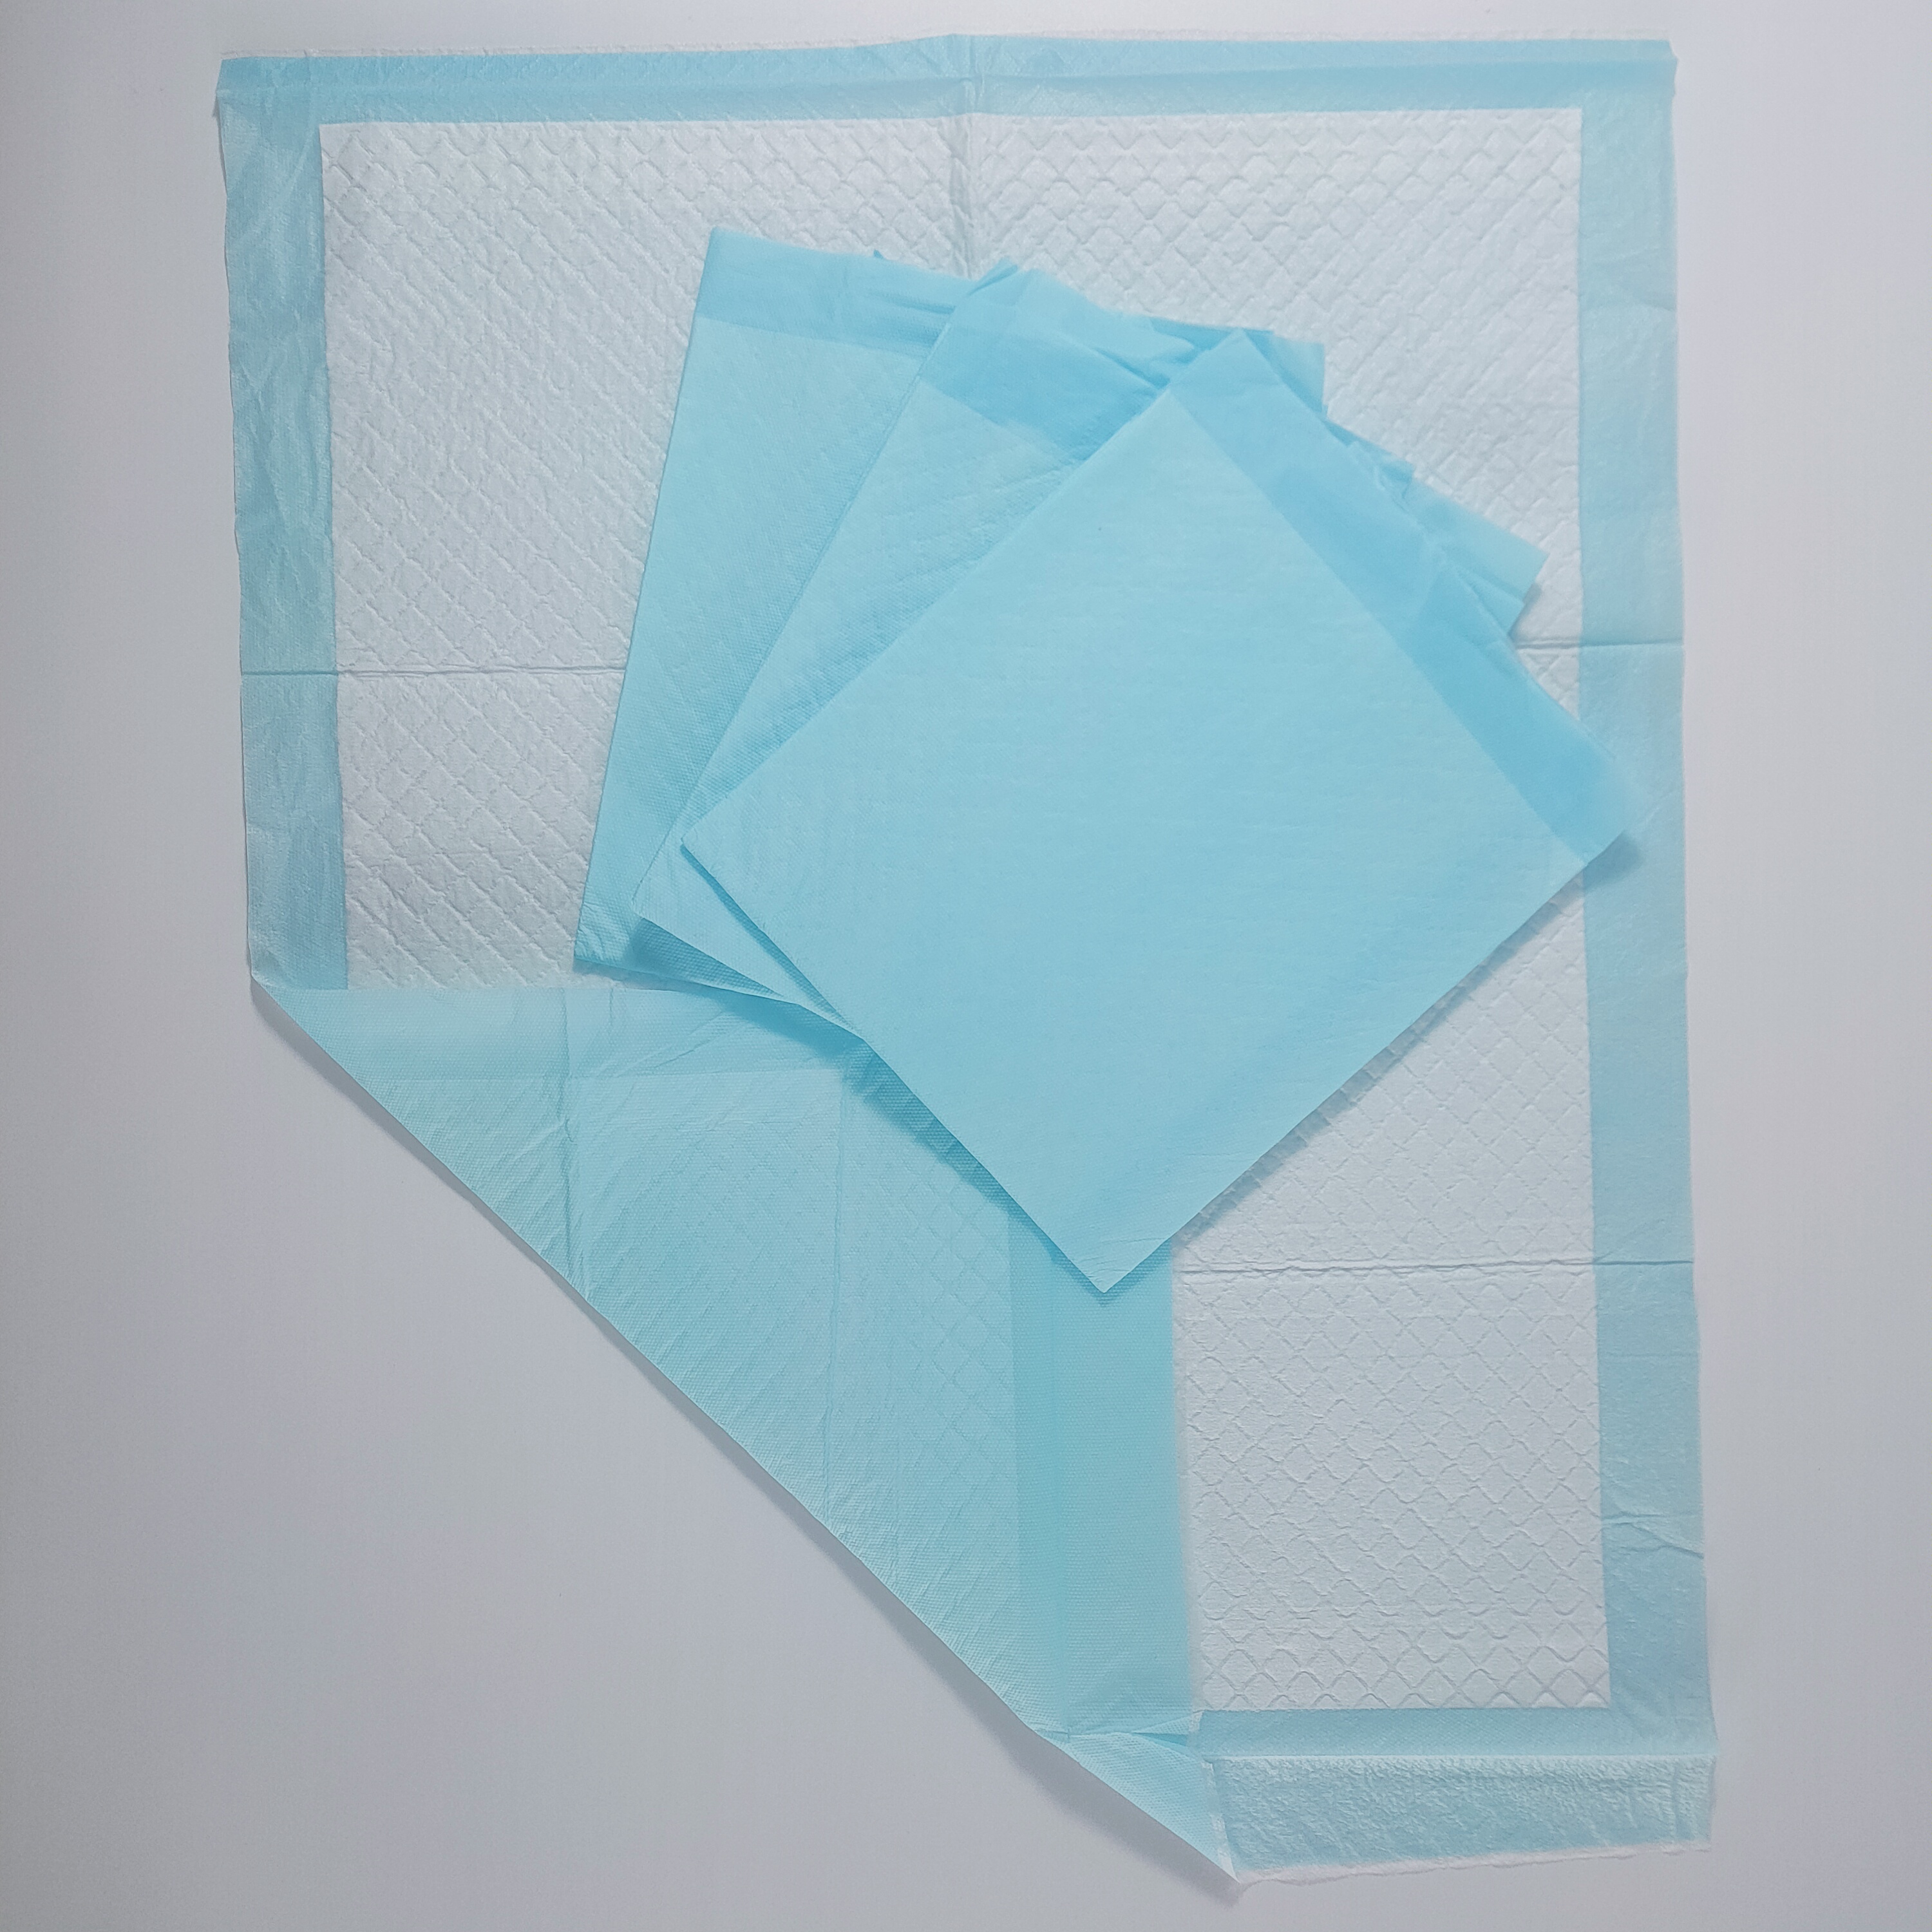 Soft Surface Bed Pads Disposable Waterproof Underpads